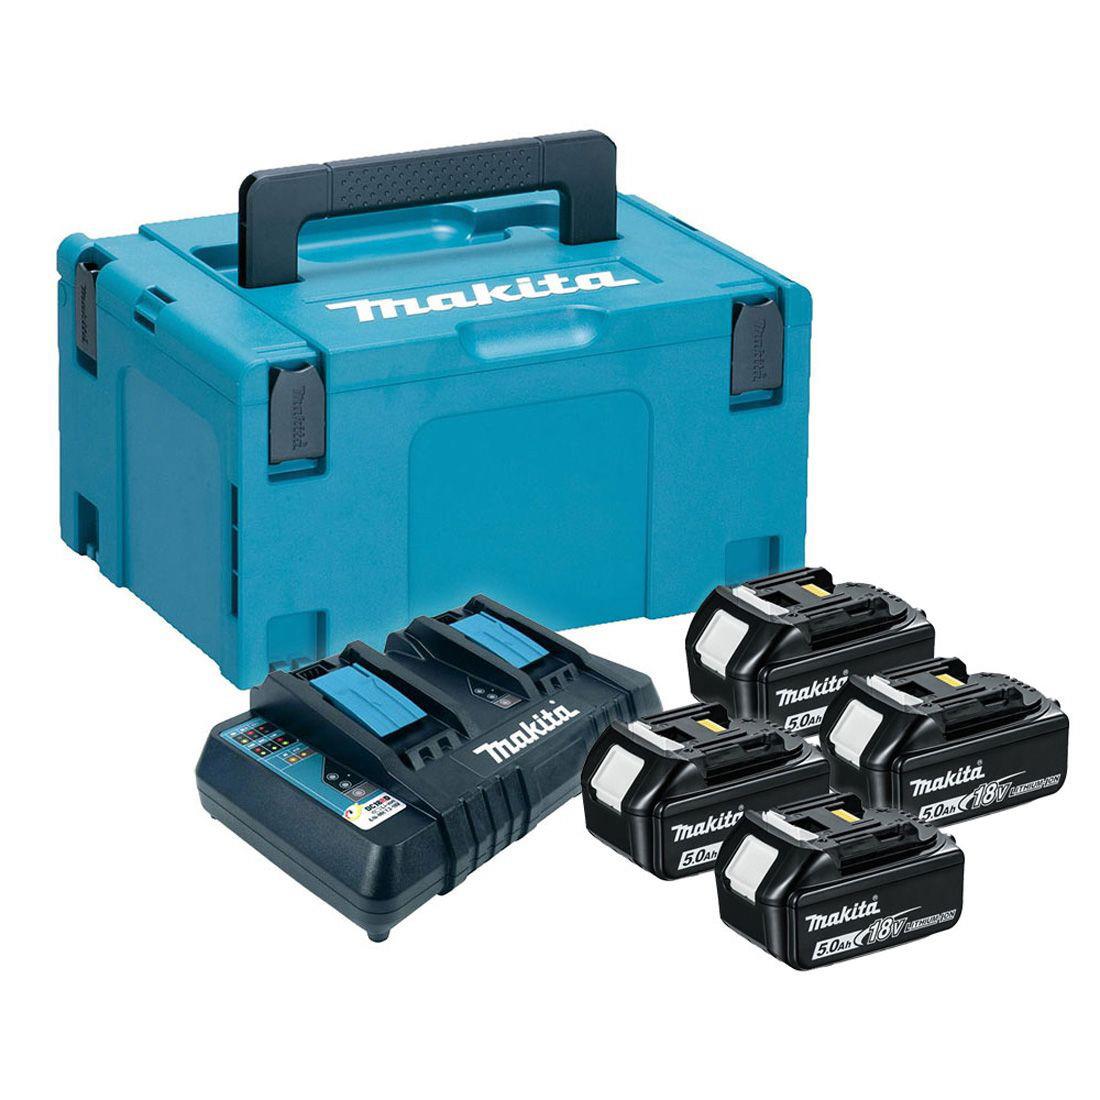 Makita 197627-6 Power Source Kit; 4 x 5.0 Ah Batteries; Twin Charger; Supplied In MakPak Case